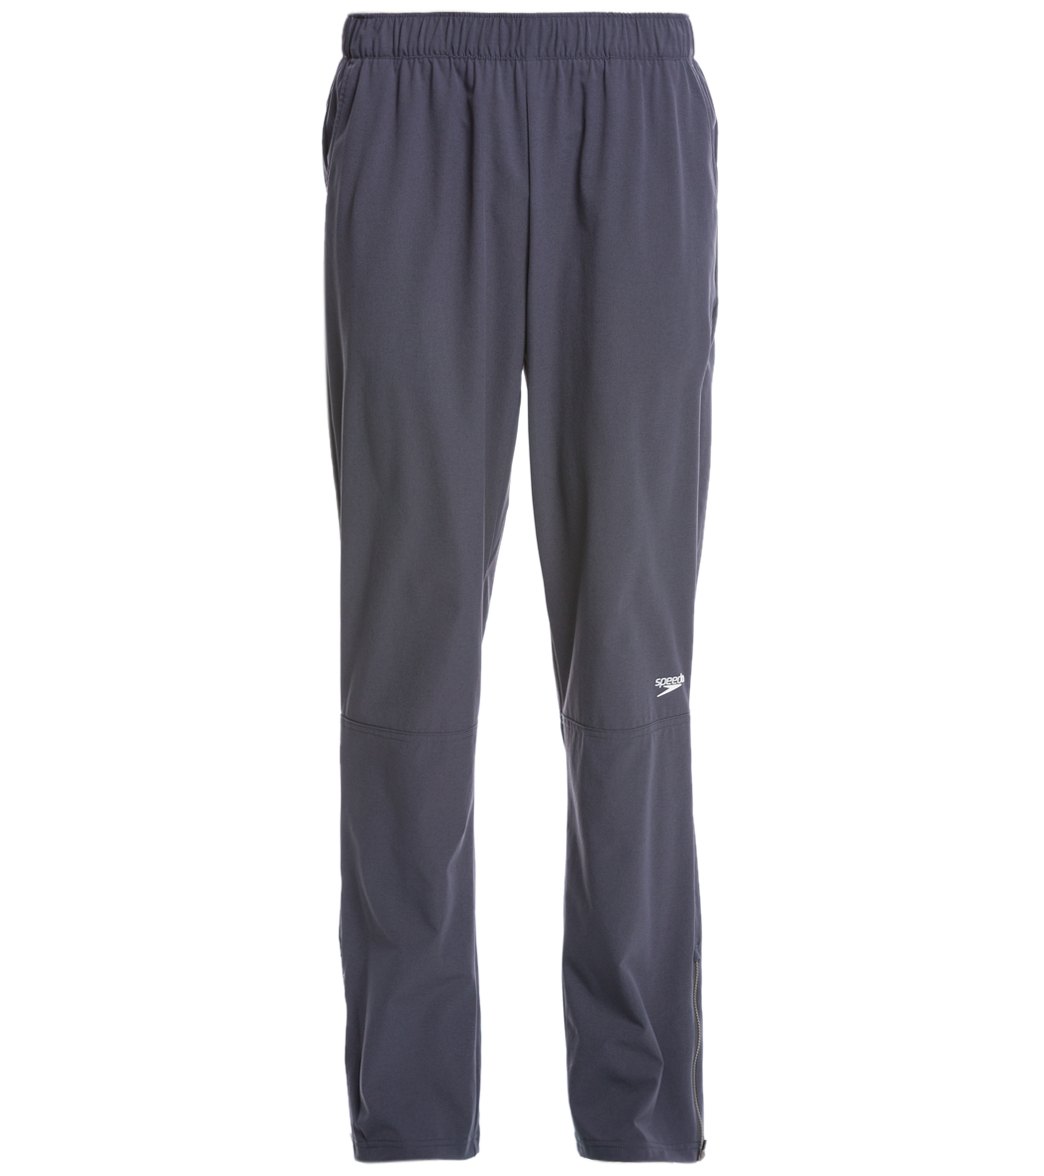 Speedo Men's Tech Warm Up Pant at SwimOutlet.com - Free Shipping